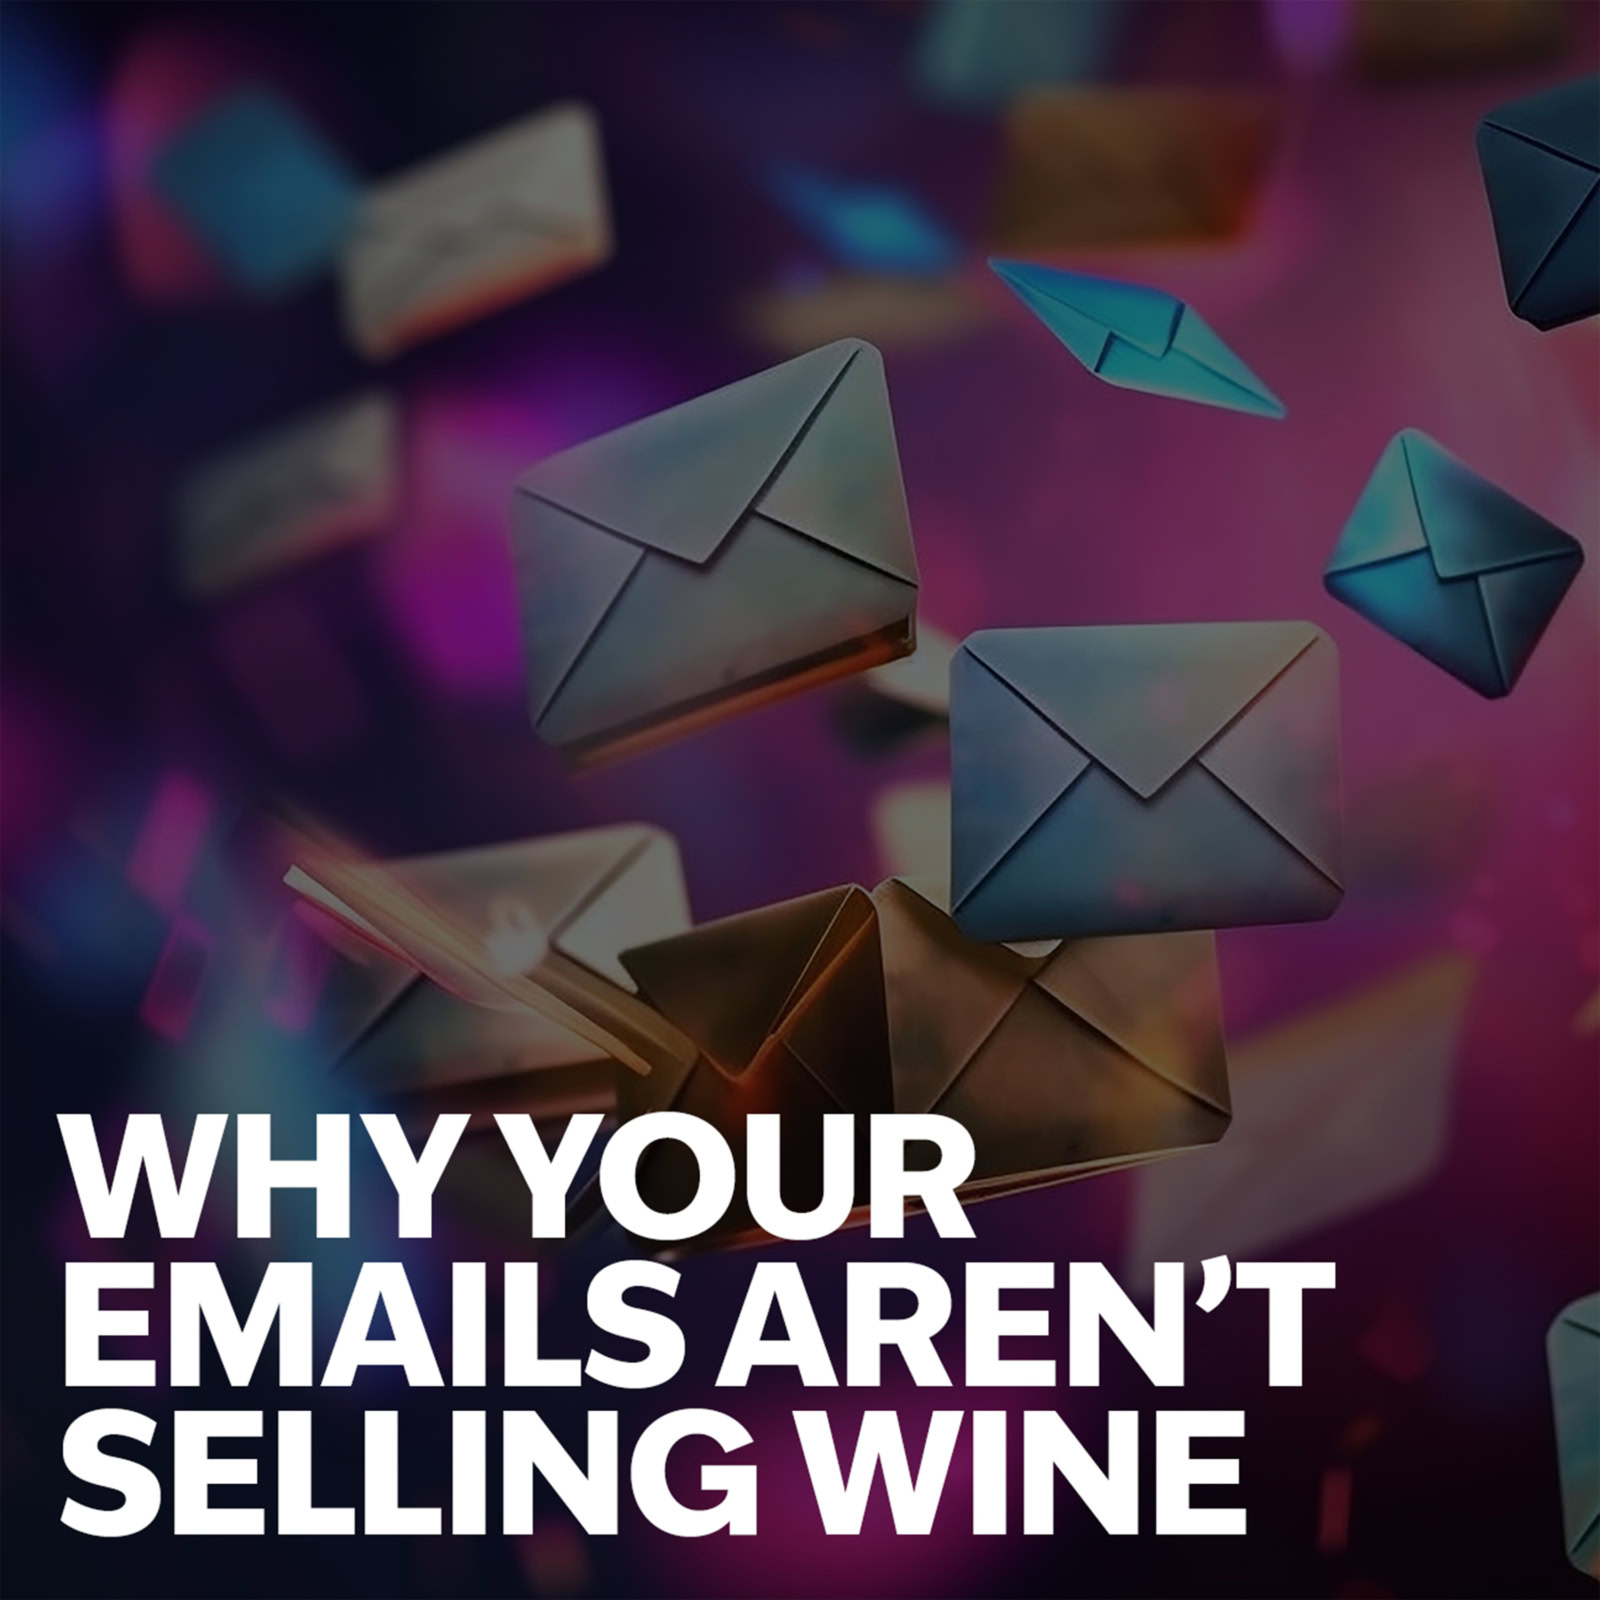 Podcast cover reads Why your emails aren't selling Wine, atop darkened image of envelopes flying across colorful background